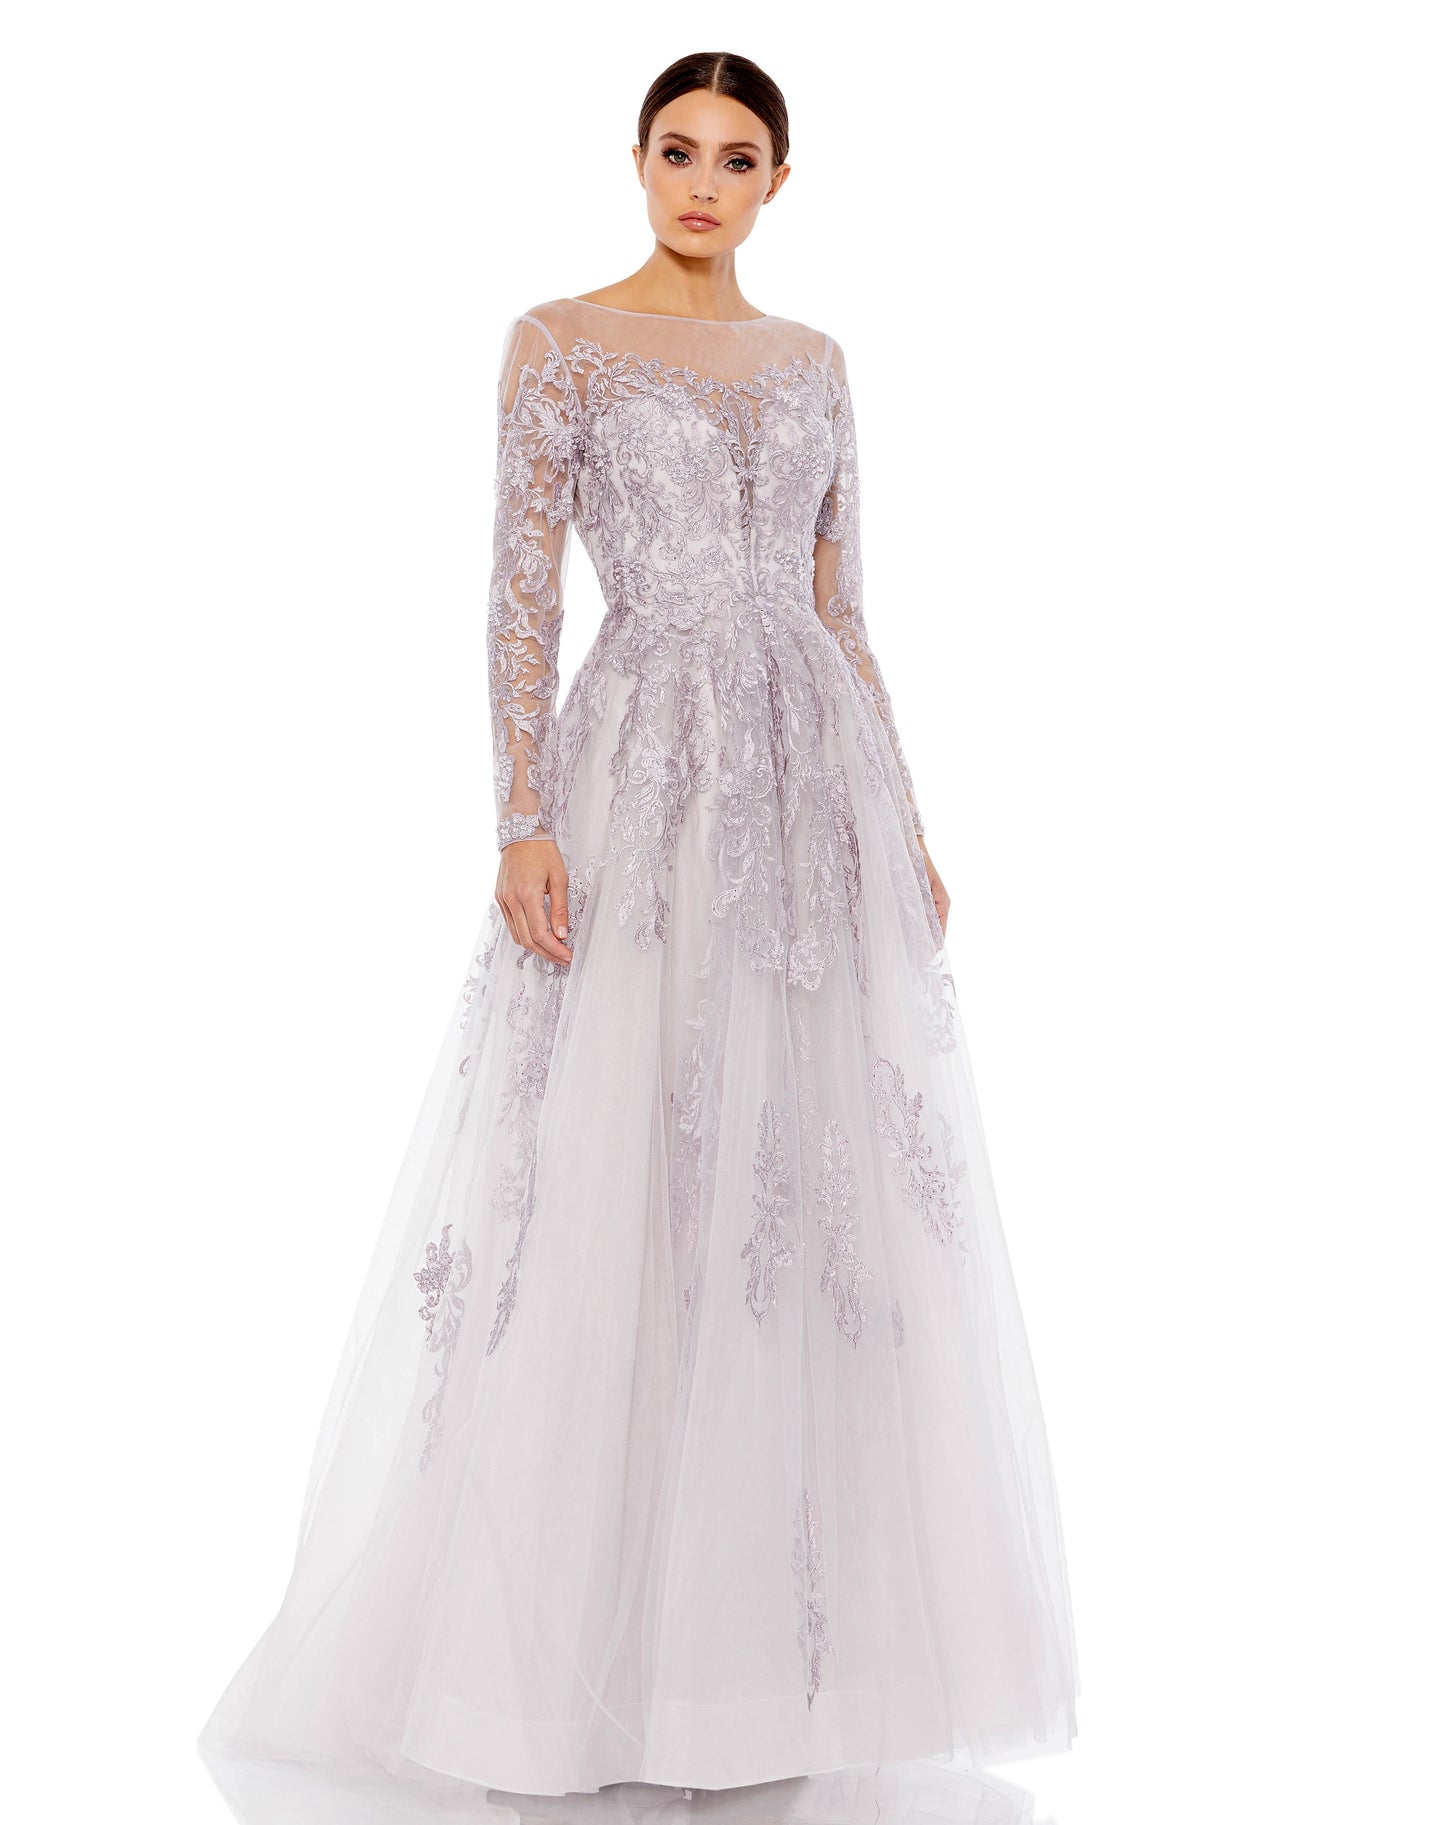 Mac Duggal Hand embellished tulle fabric (100% polyester) Partially lined bodice; fully lined skirt; semi-sheer unlined sleeves Illusion boat neckline Long sleeves Concealed back zipper Approx. 62.5" from top of shoulder to bottom hem Available in Lilac S